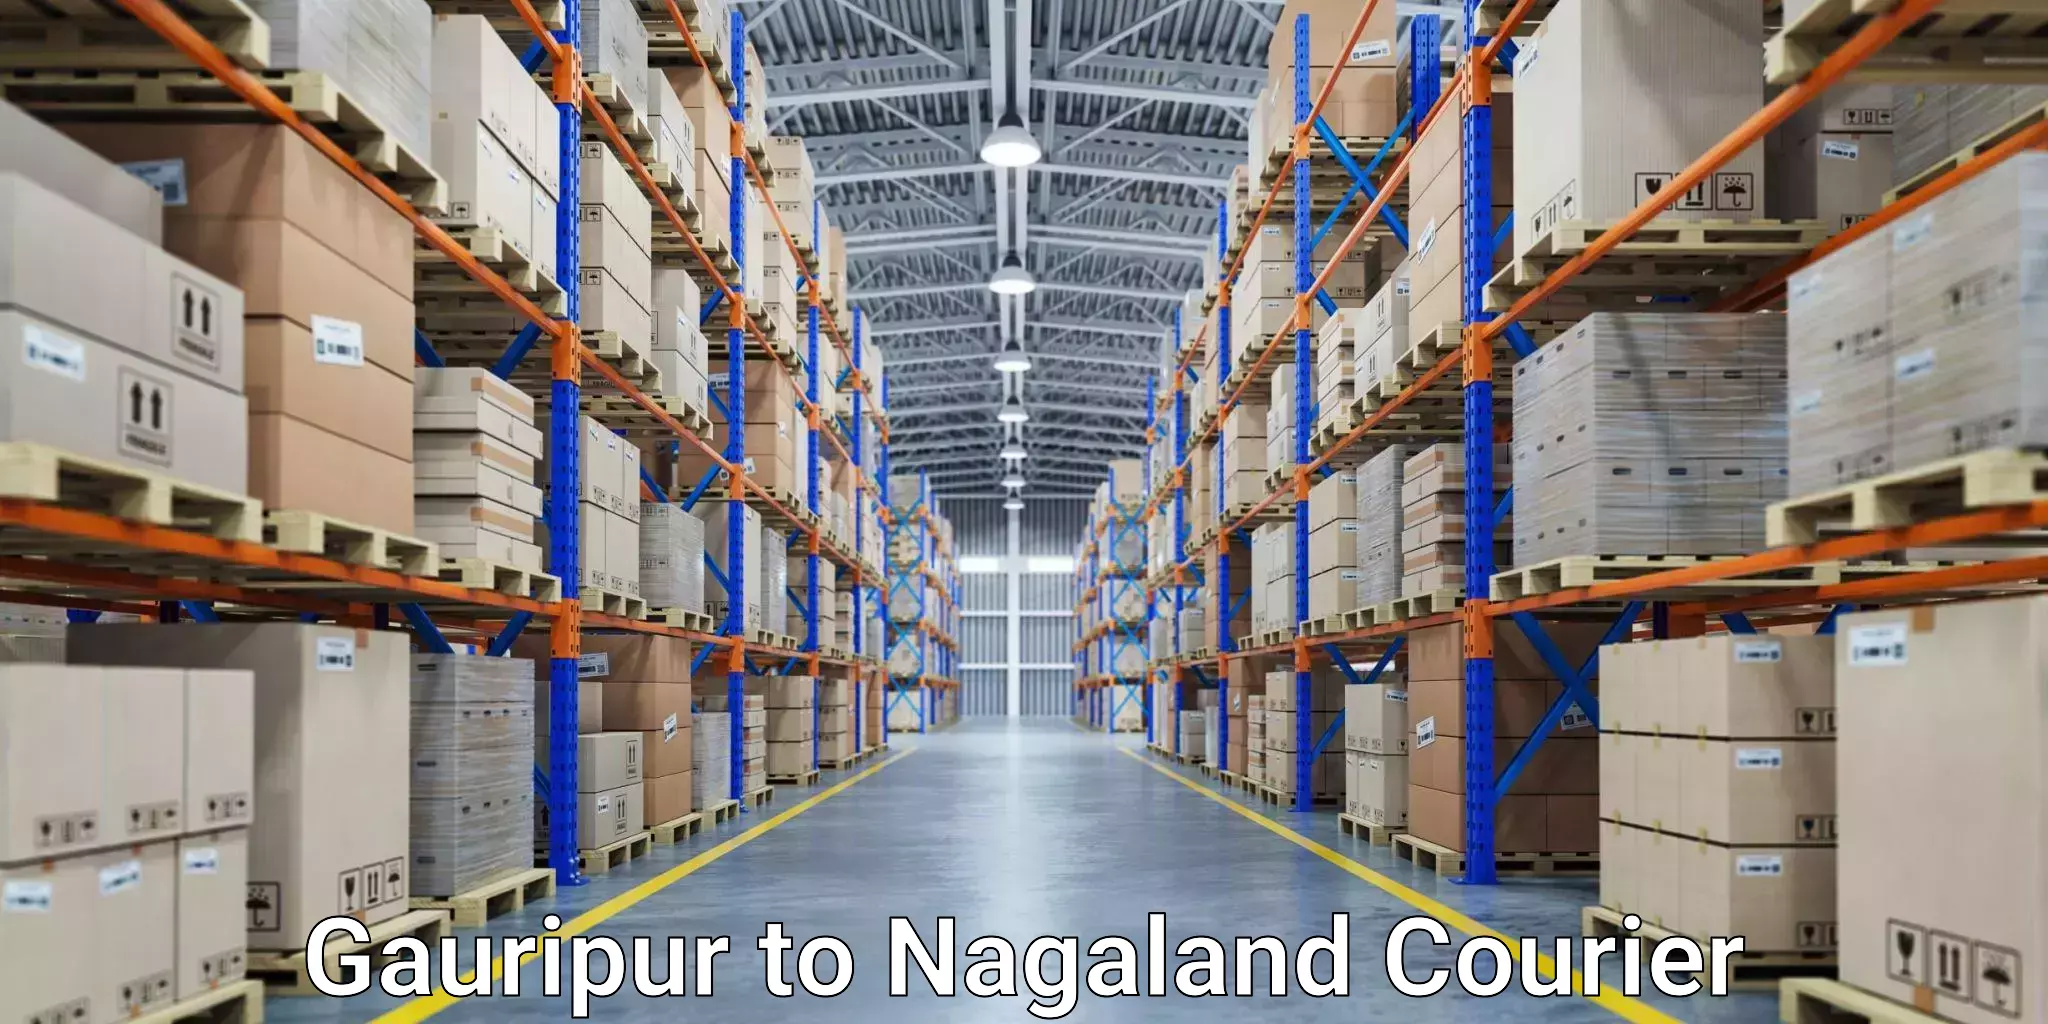 Ground shipping Gauripur to Nagaland